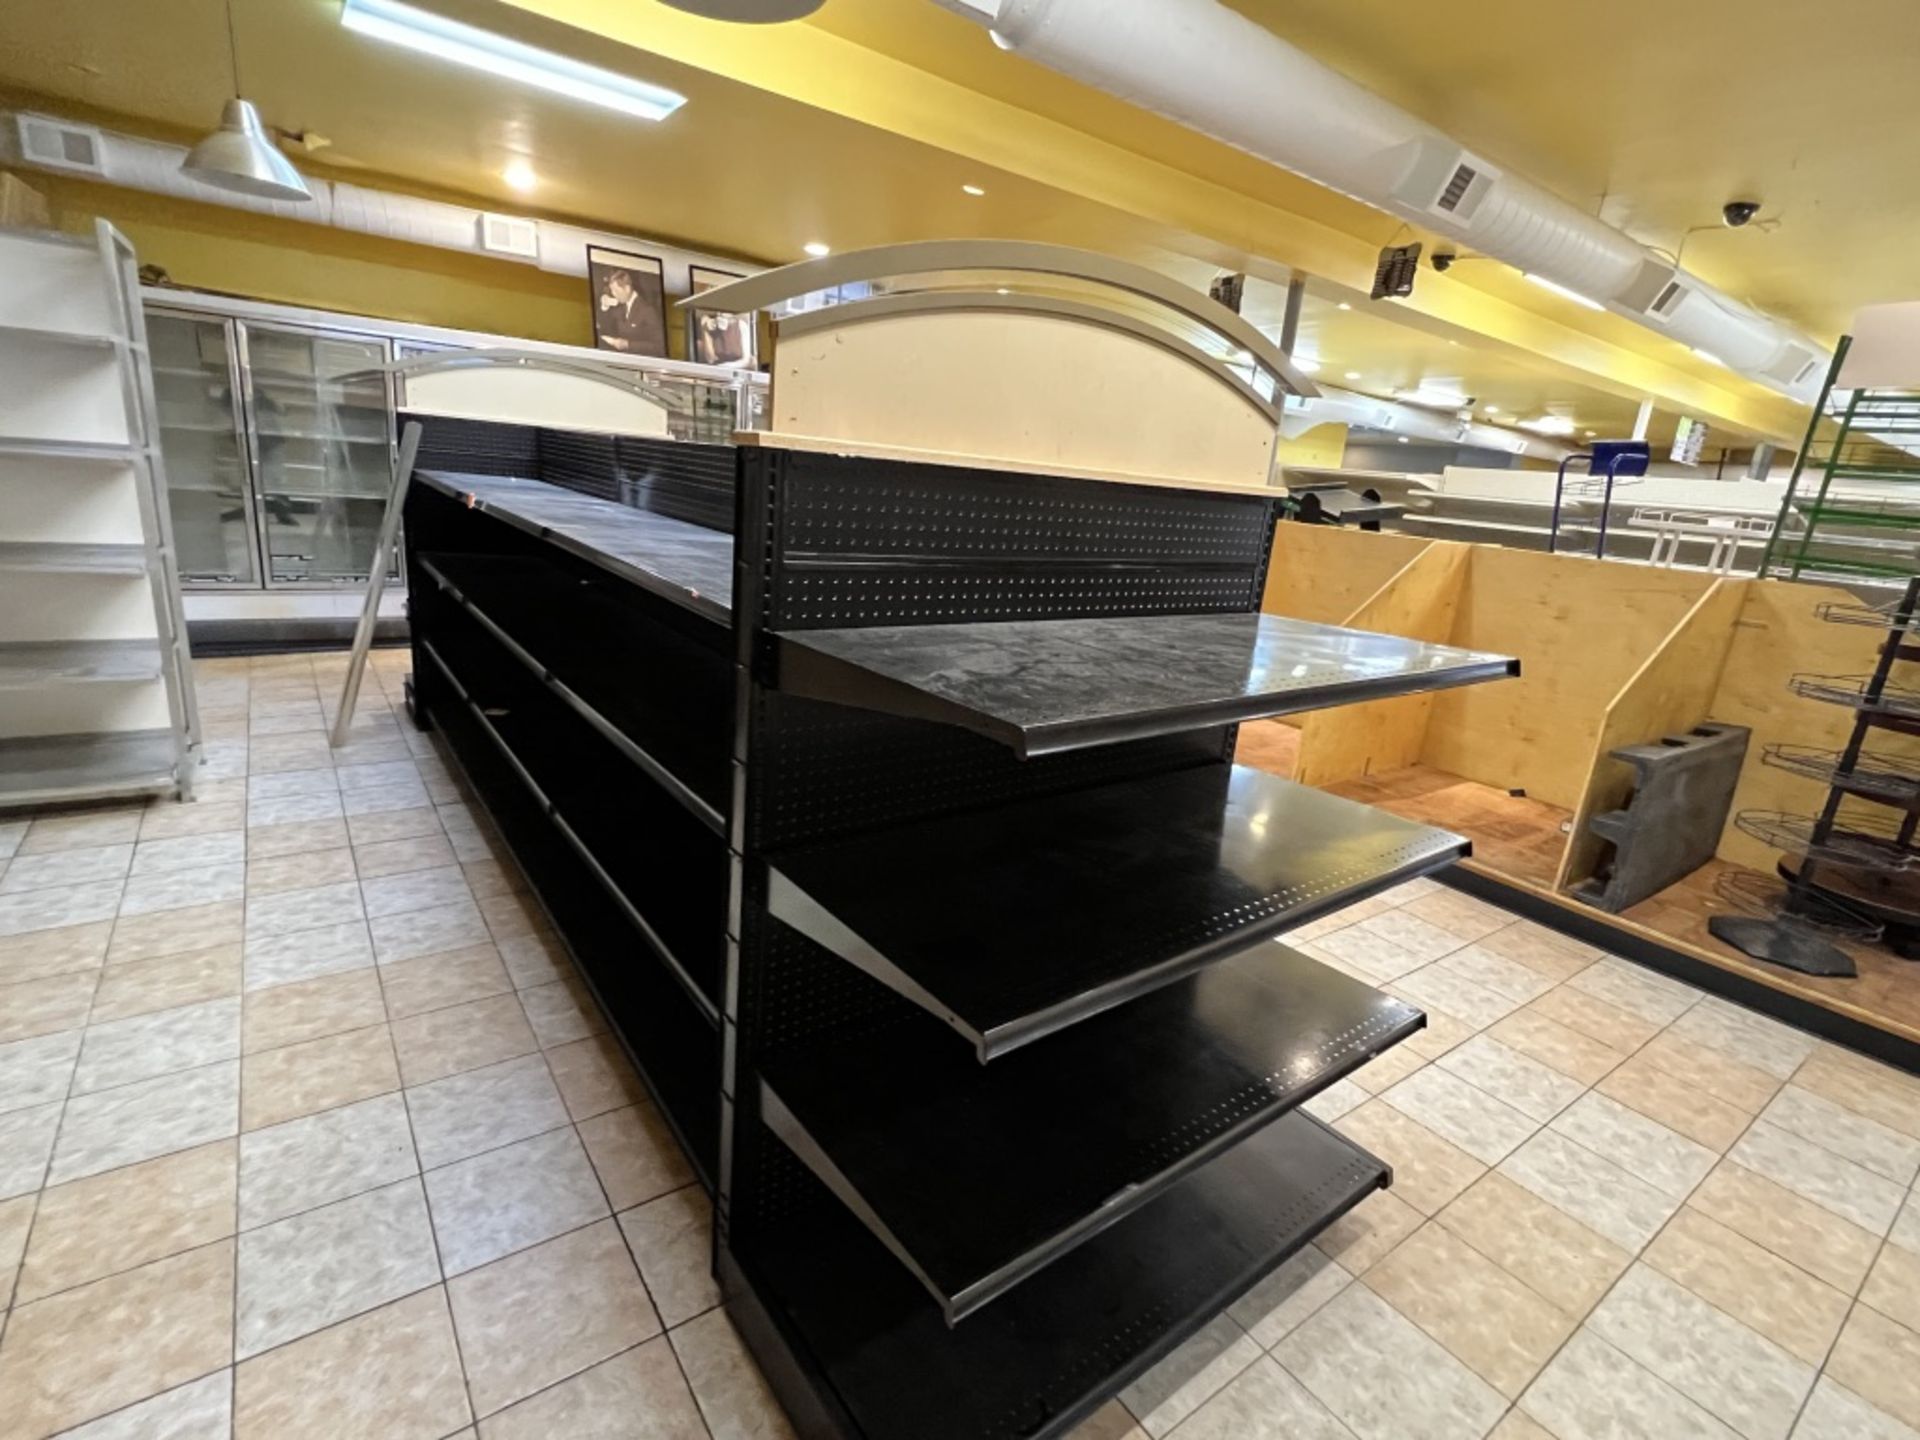 8 Section adjustable Gondola shelving system Approximately 195” Long X 50” Wide with 2 archways o - Image 8 of 12